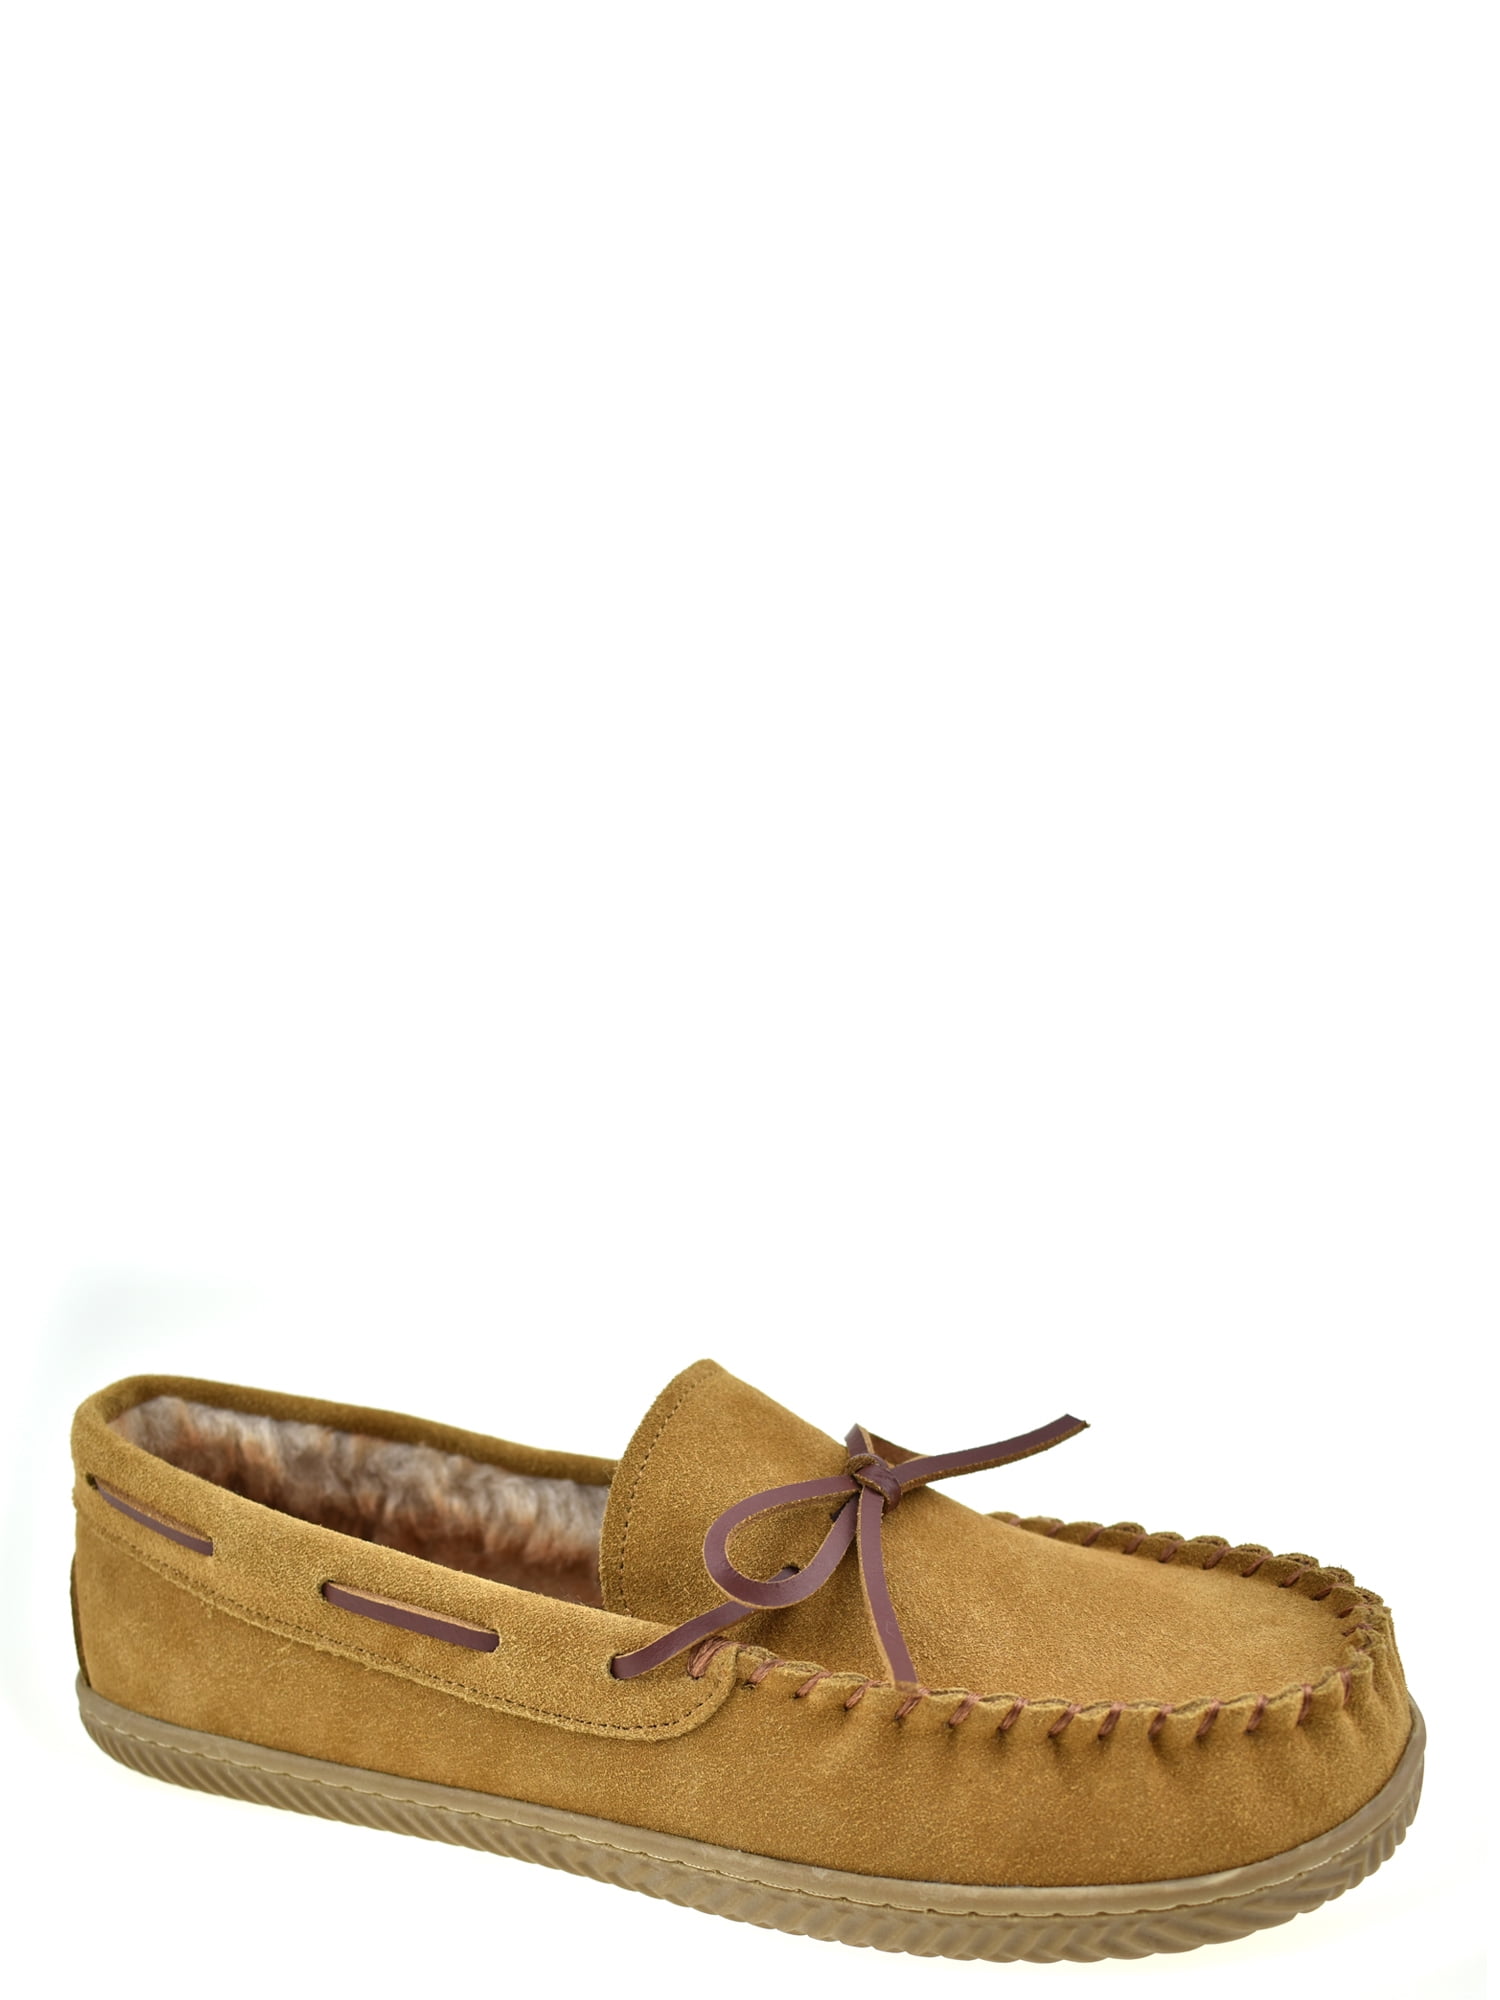 DREAM PAIRS Men/'s Suede Faux Fur Lined Moccasin Slippers